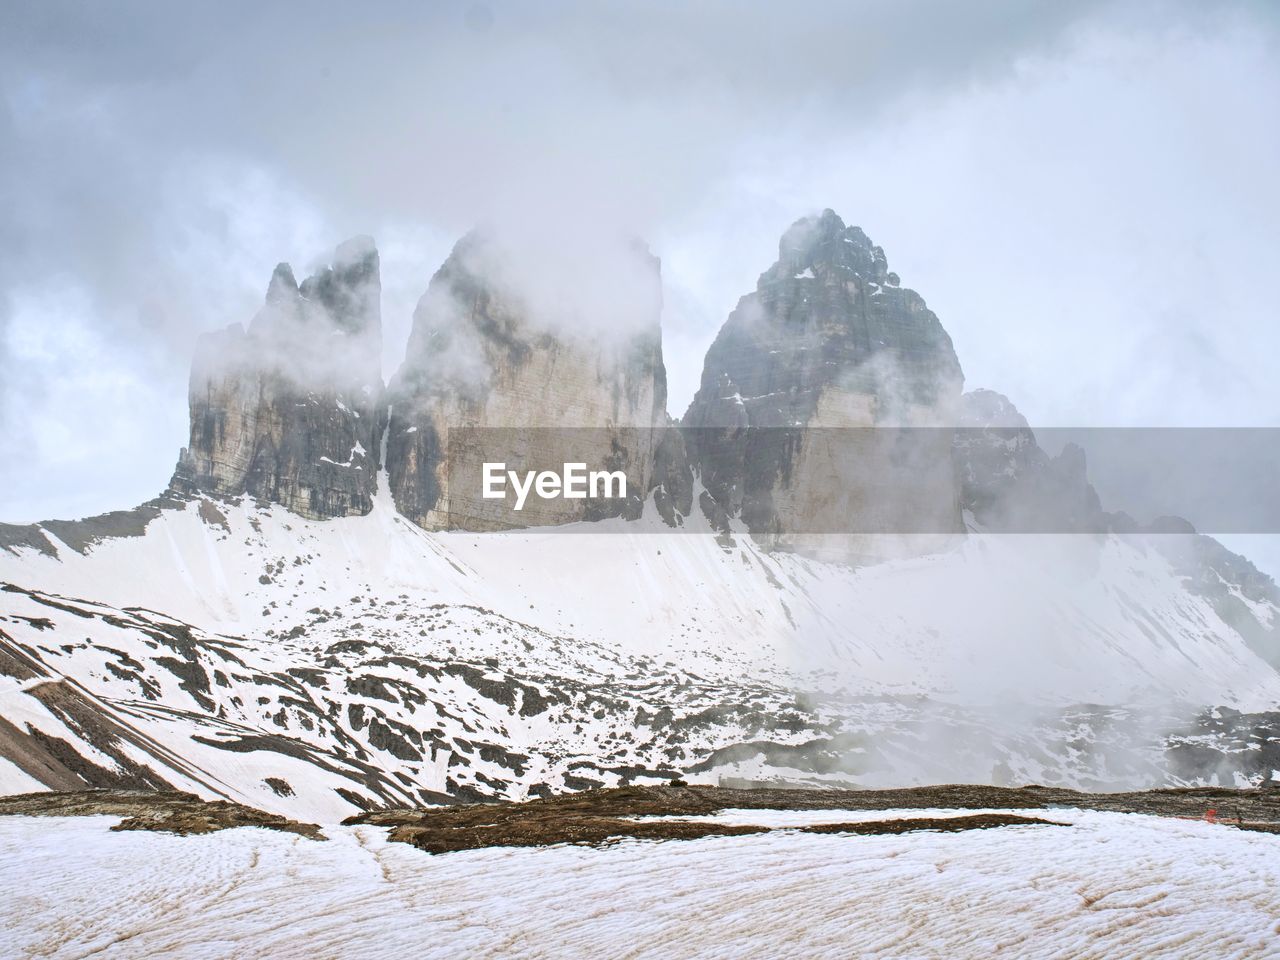 North side of sexten dolomites symbol - tre cime. may view from popular trail around the rocks